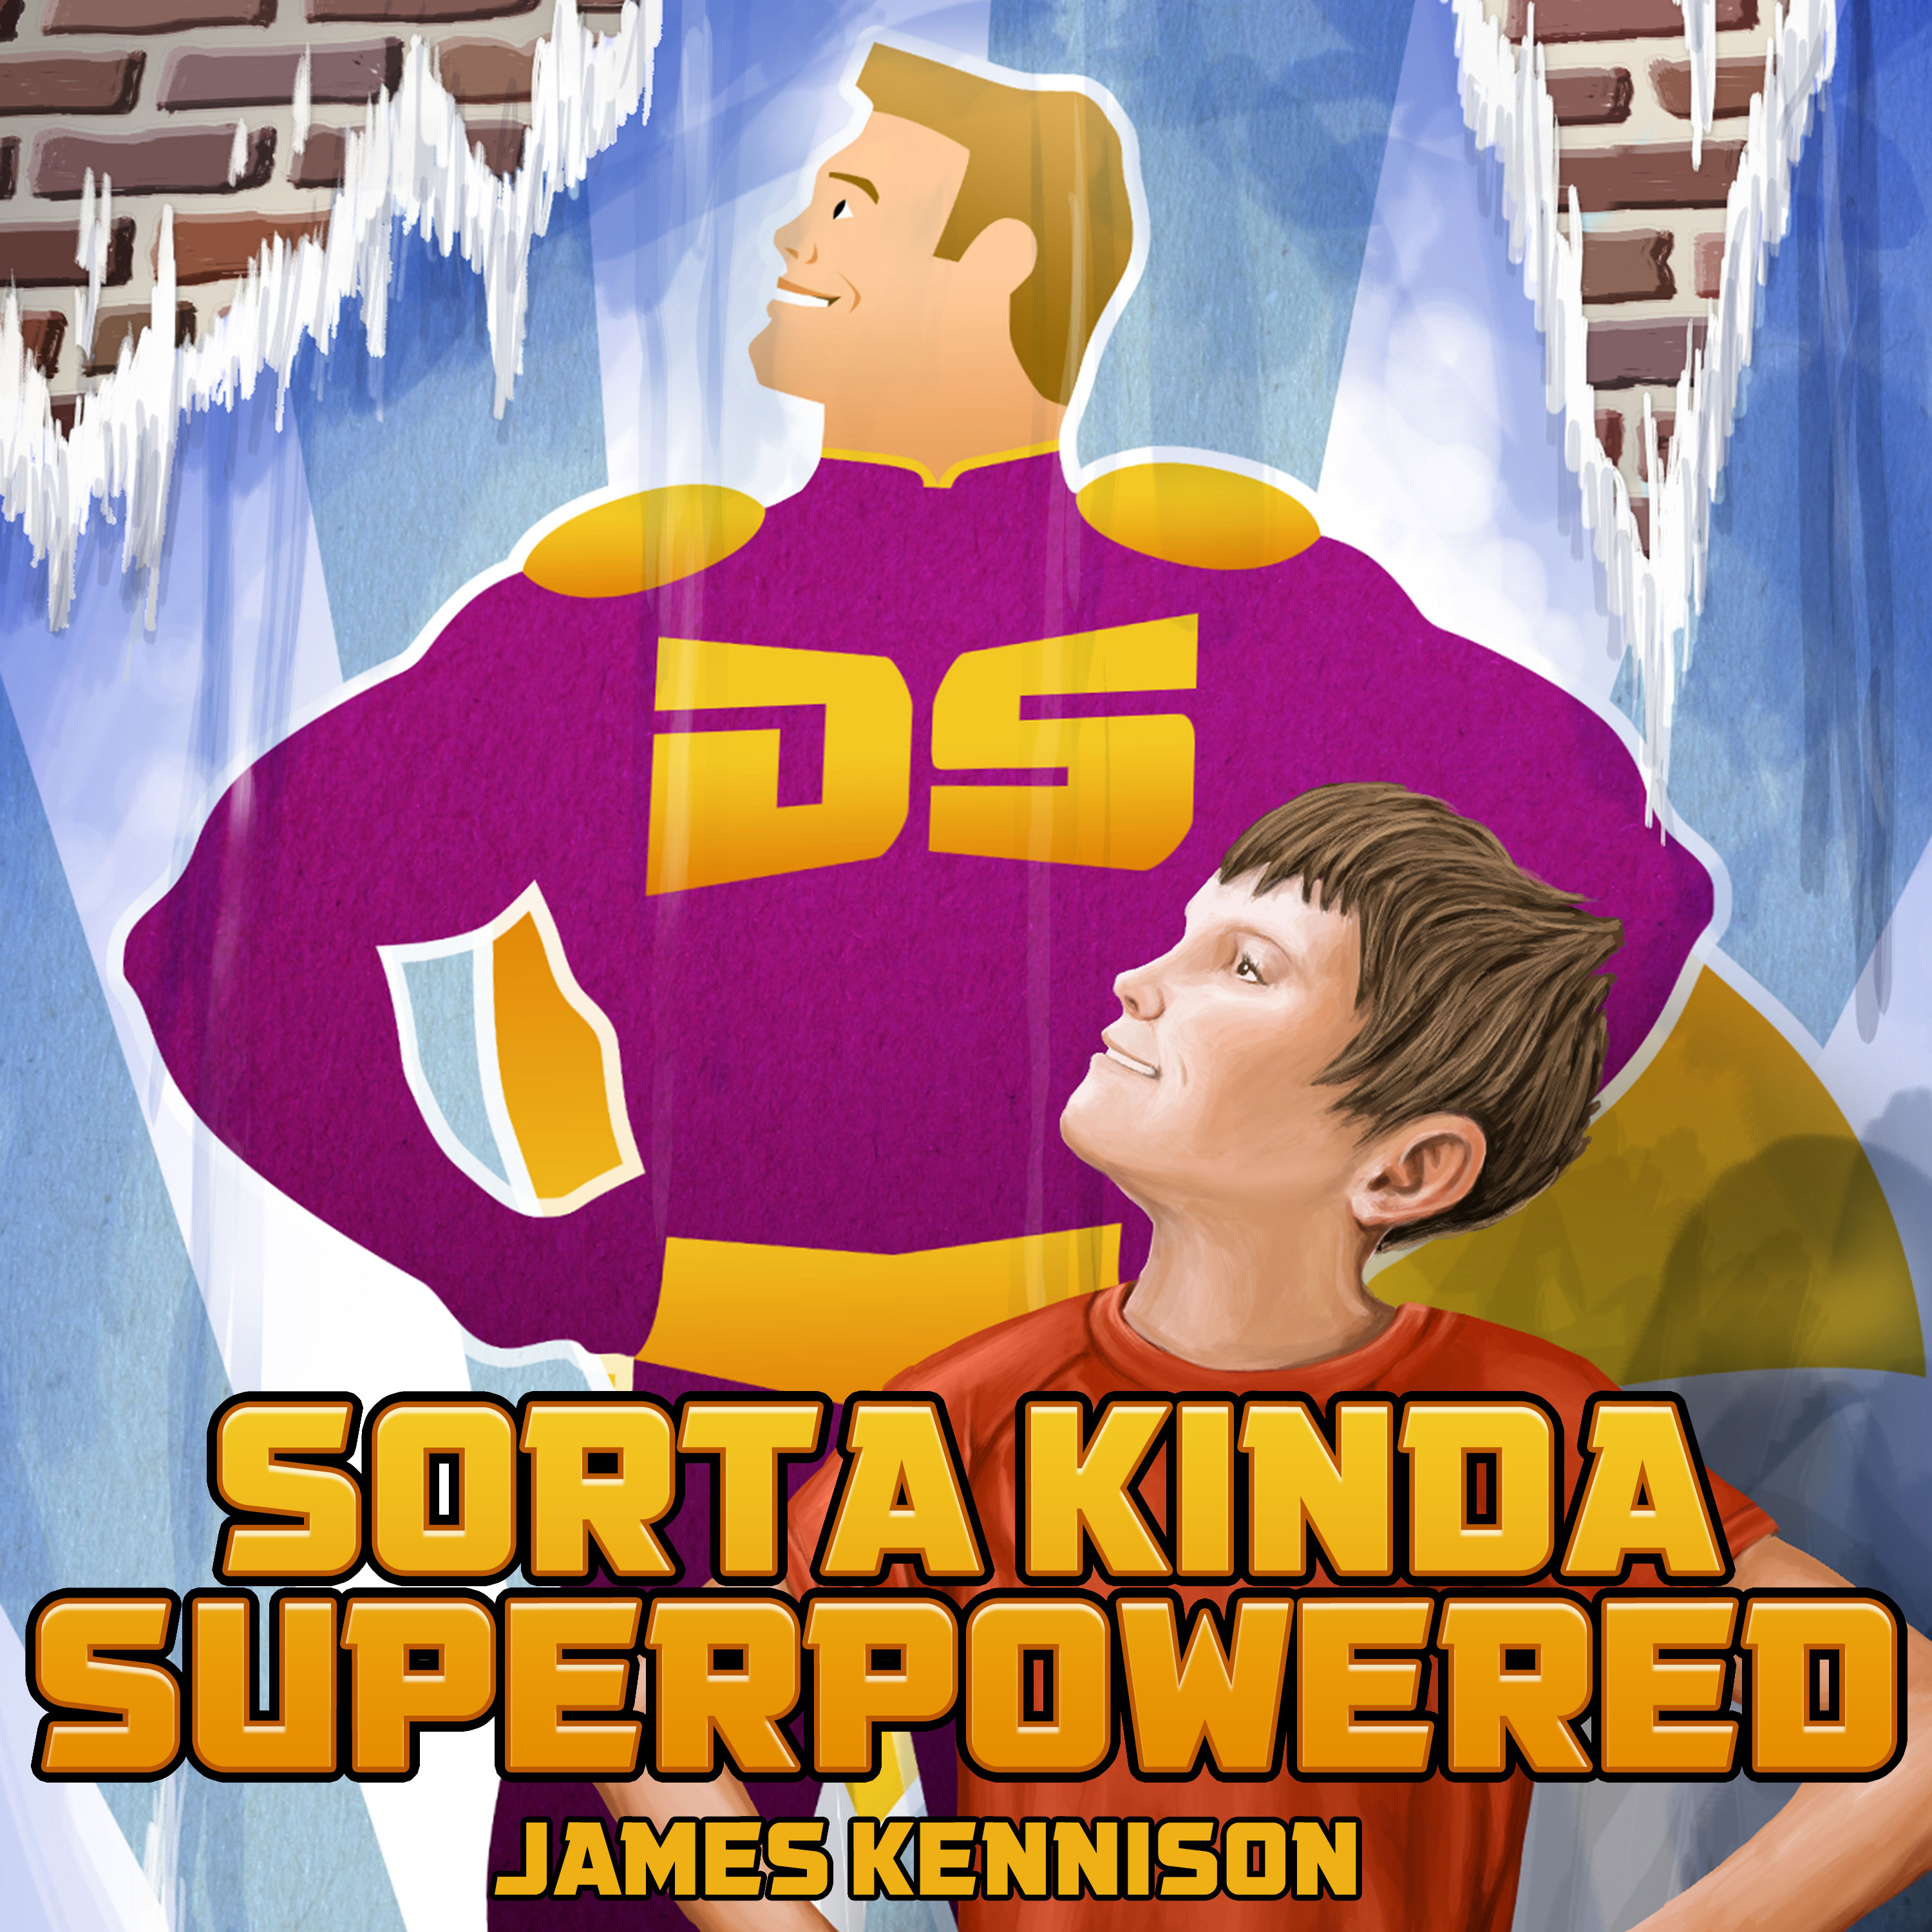 superpowered porn game images